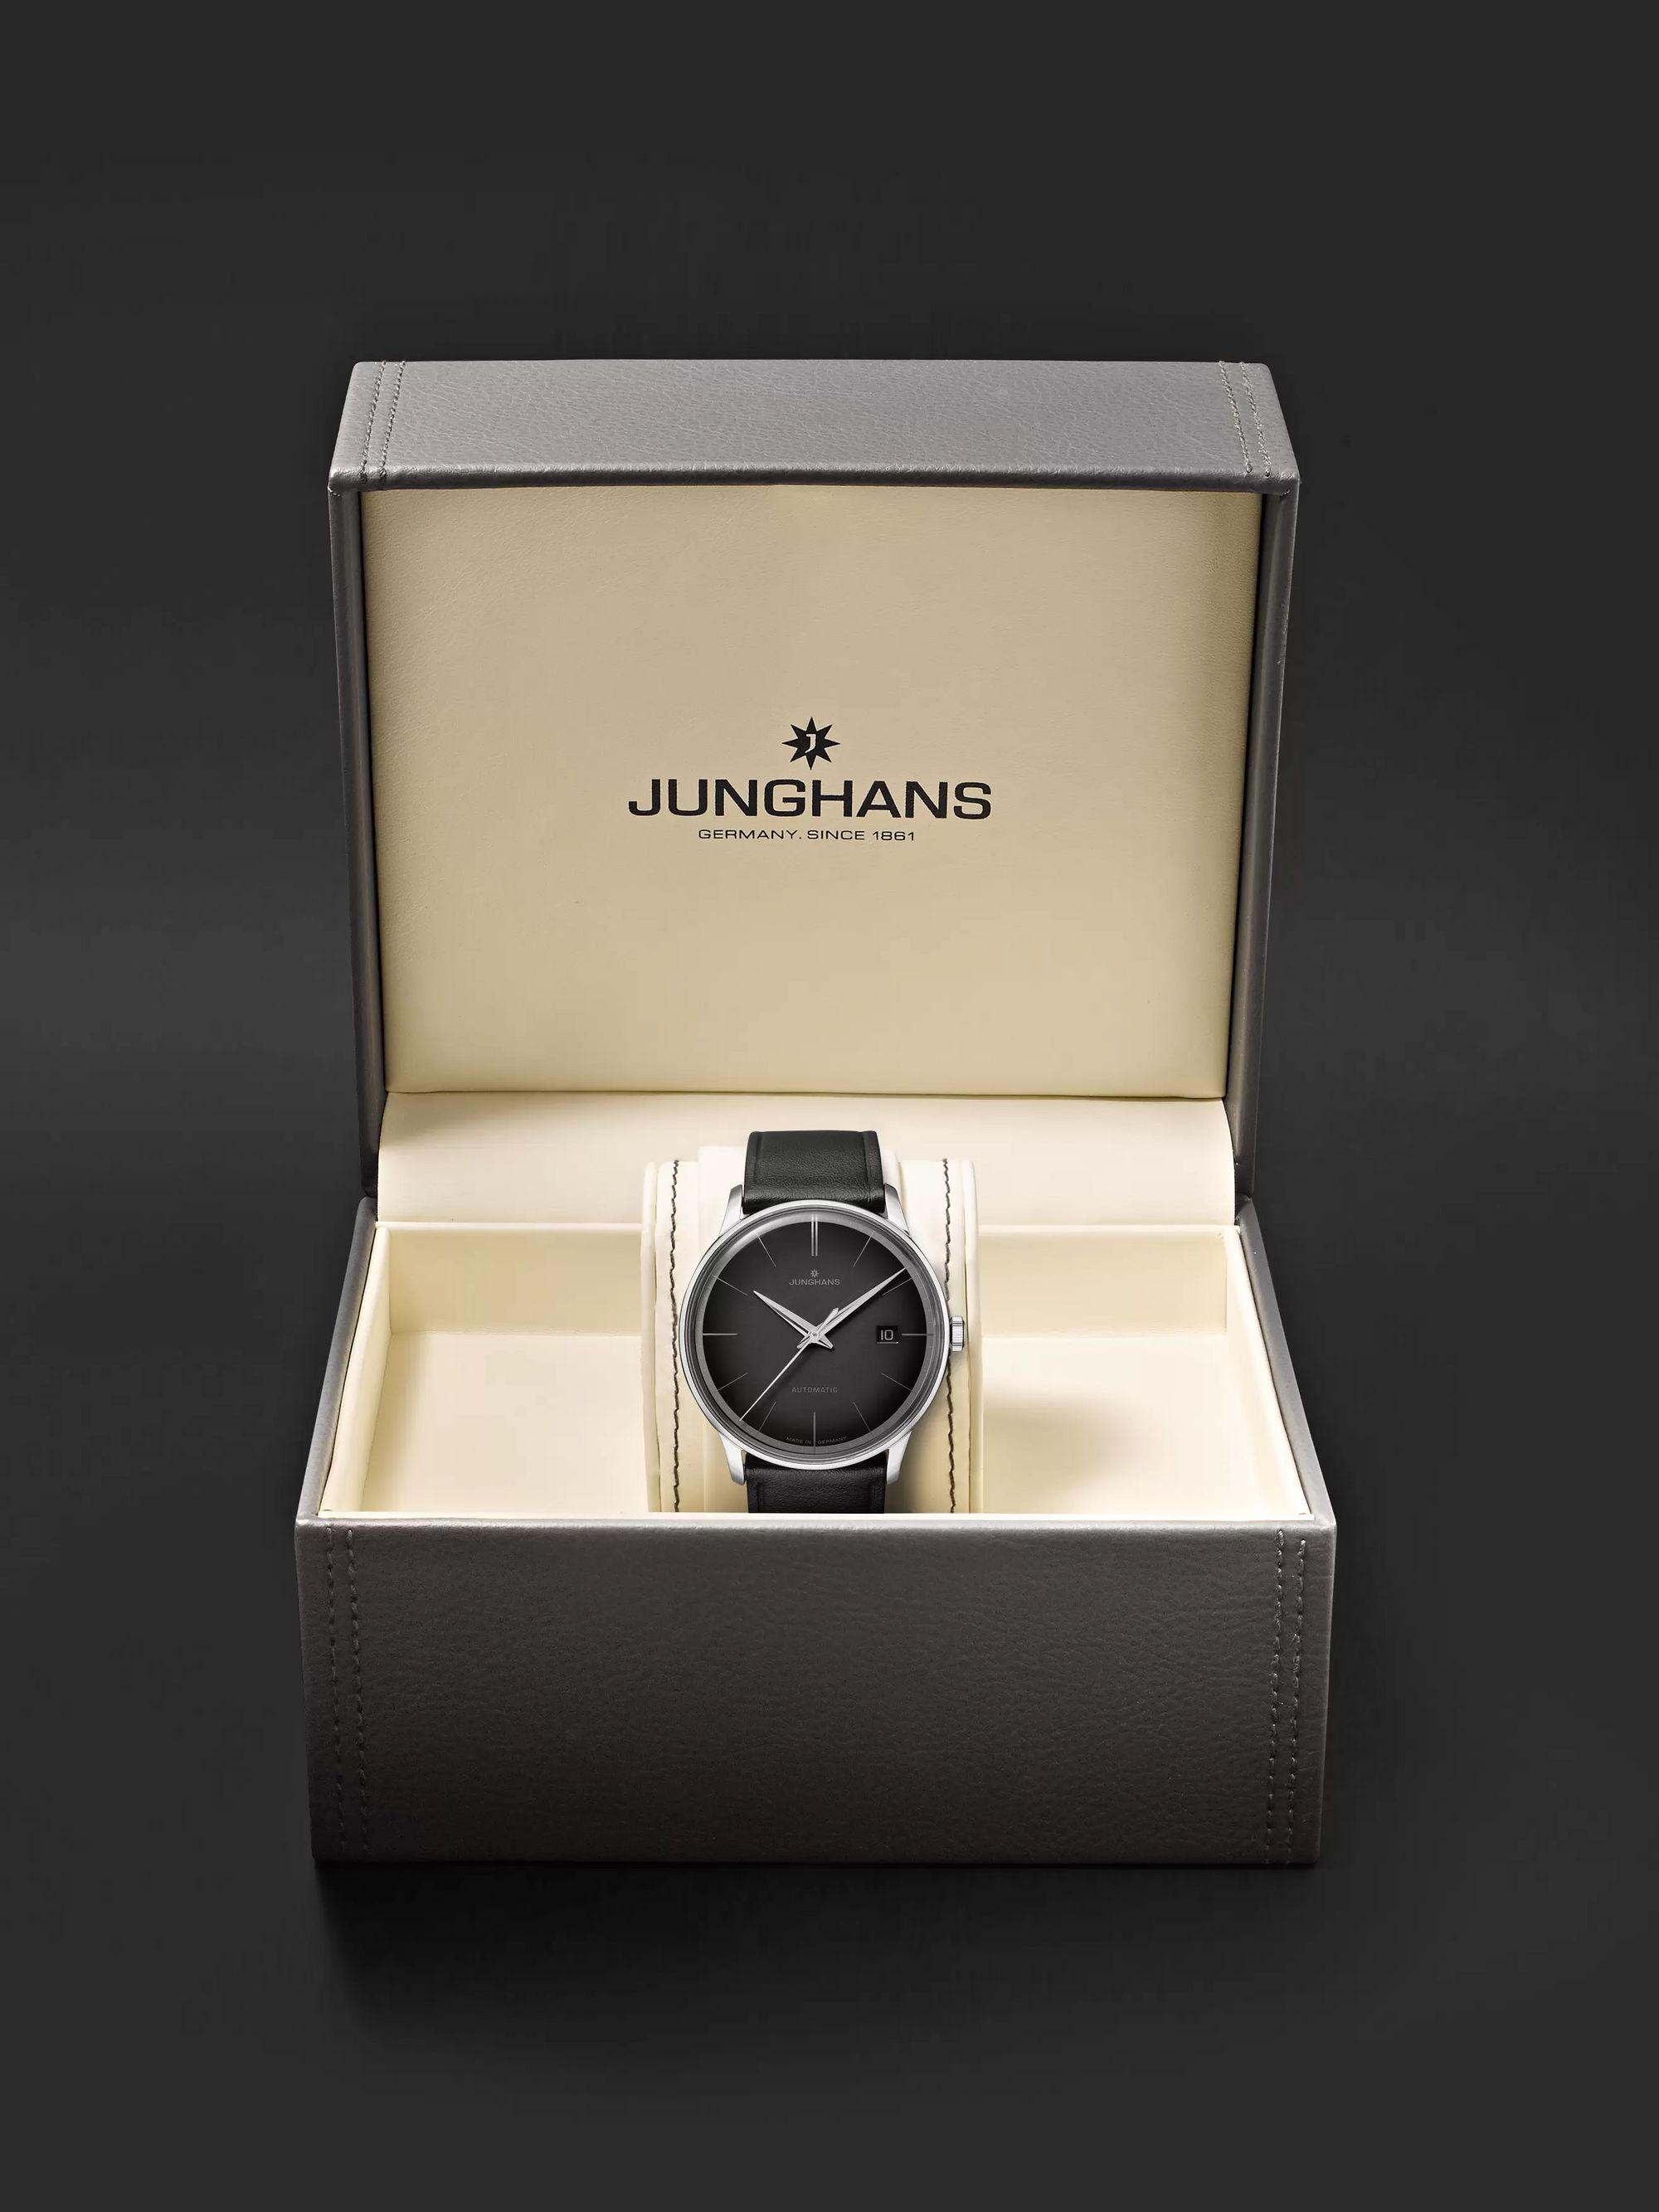 JUNGHANS Meister Automatic 38mm Stainless Steel and Leather Watch, Ref. No. 027/4051.00